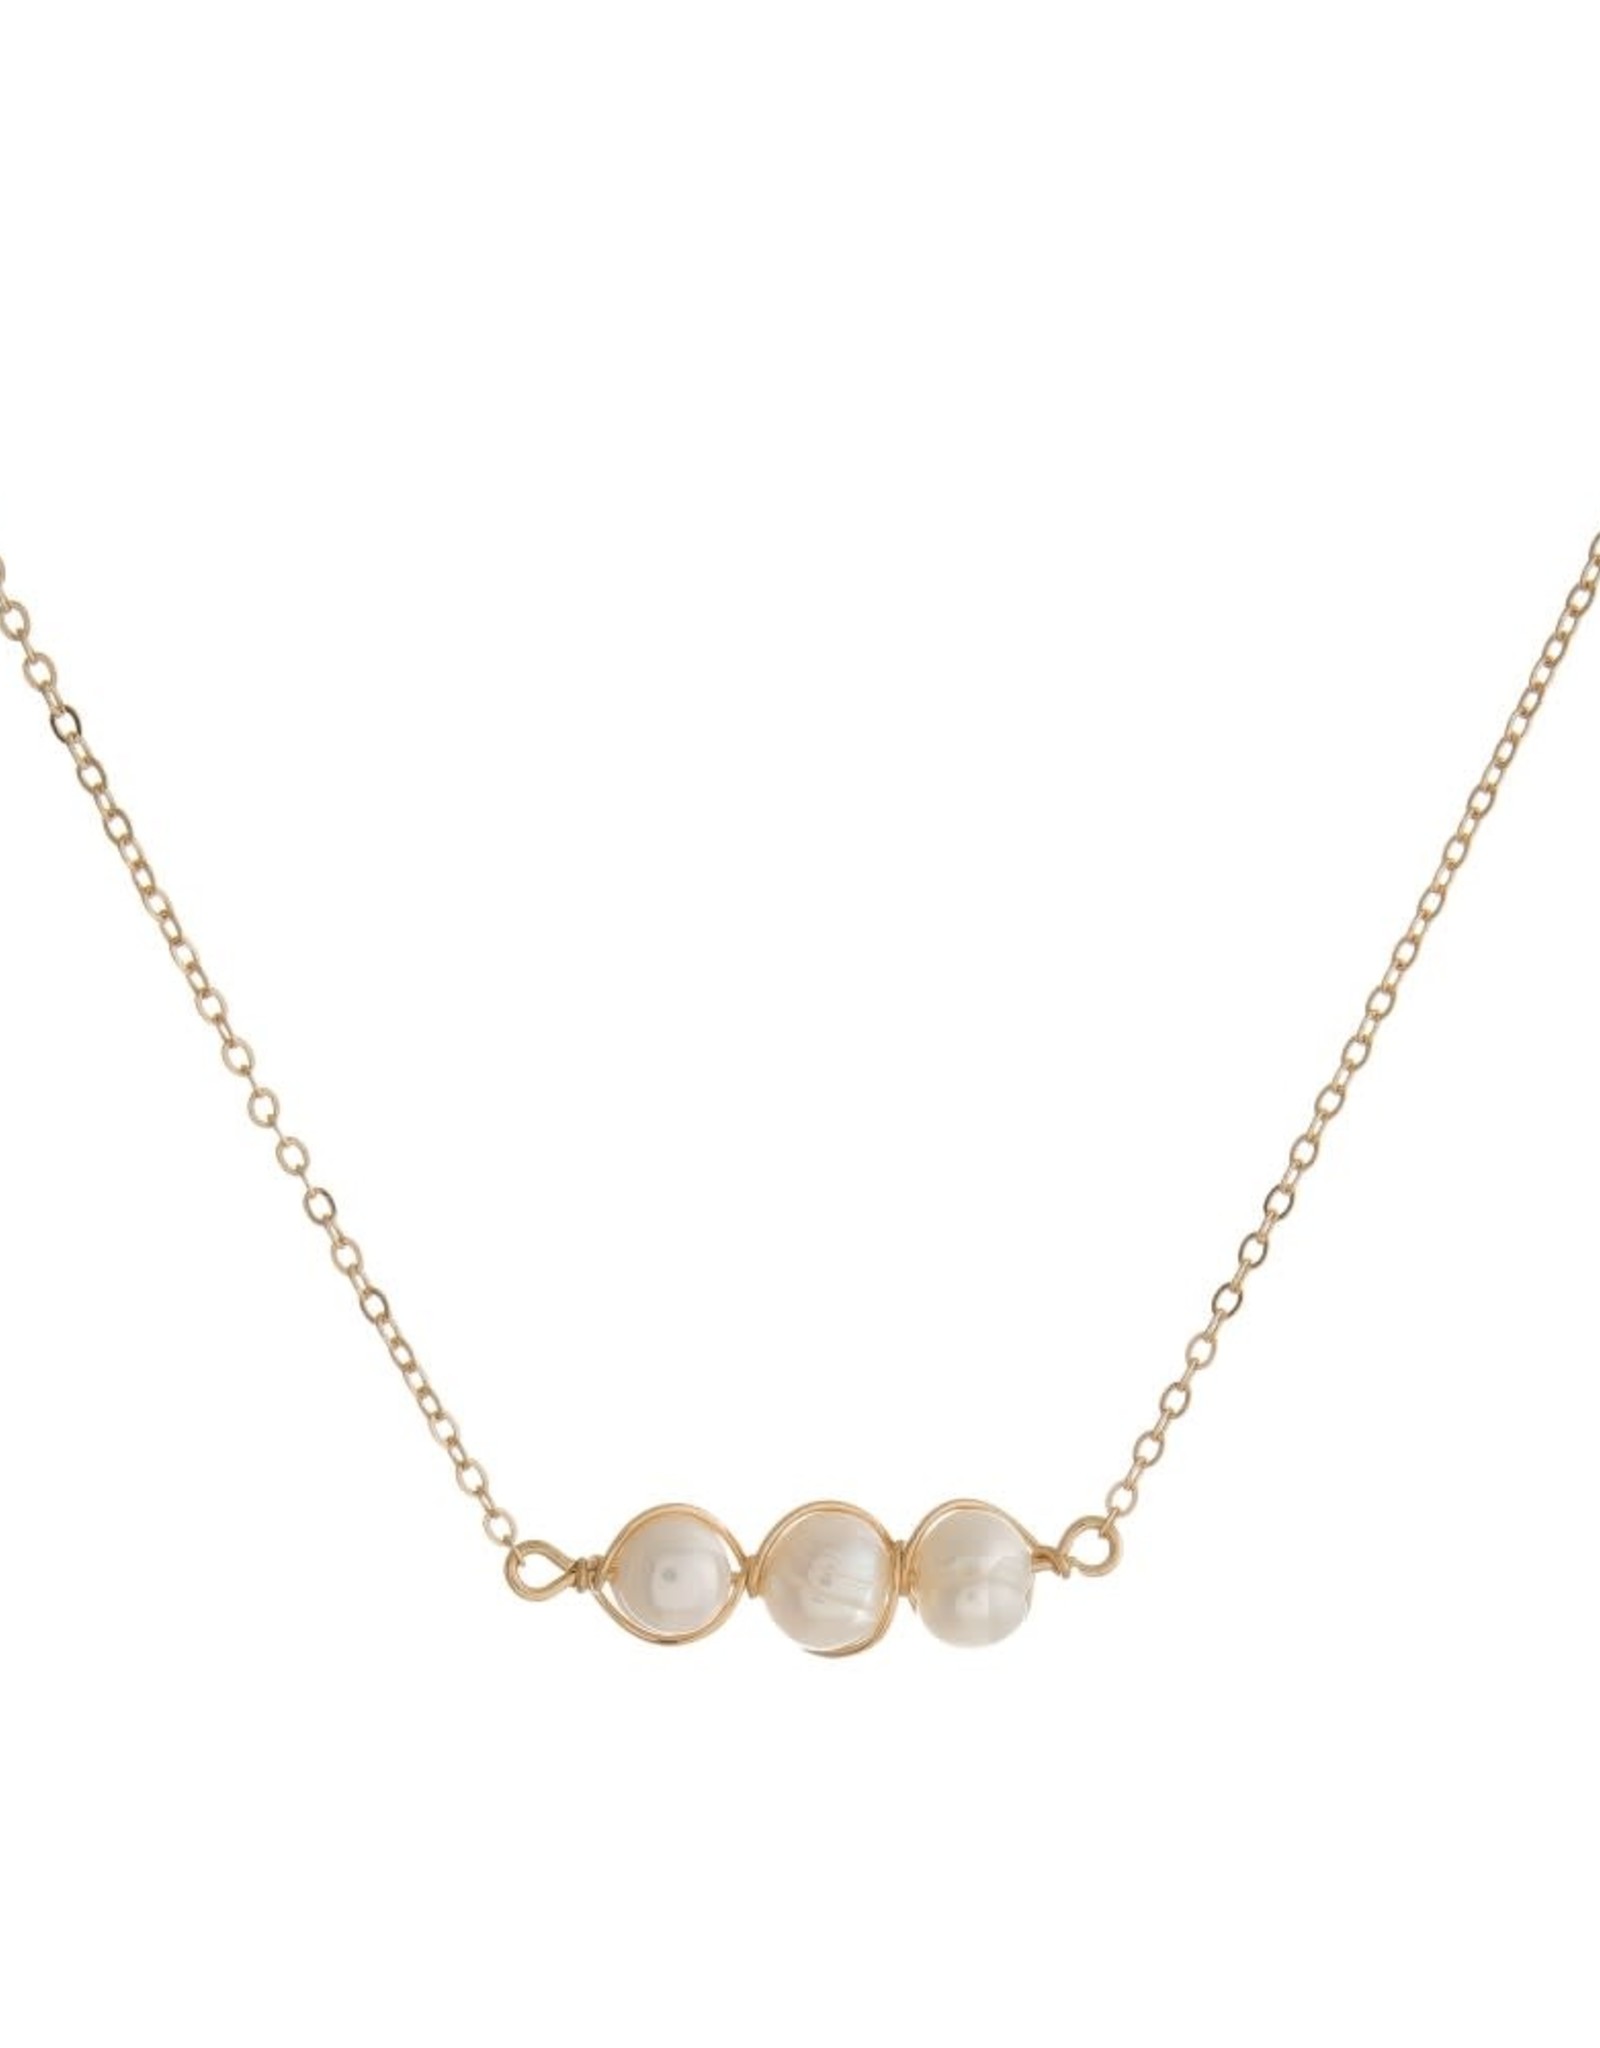 judson 130756 - Dainty metal necklace with three, wire wrapped, freshwater pearl beads. Approximately 16" in length. Gold